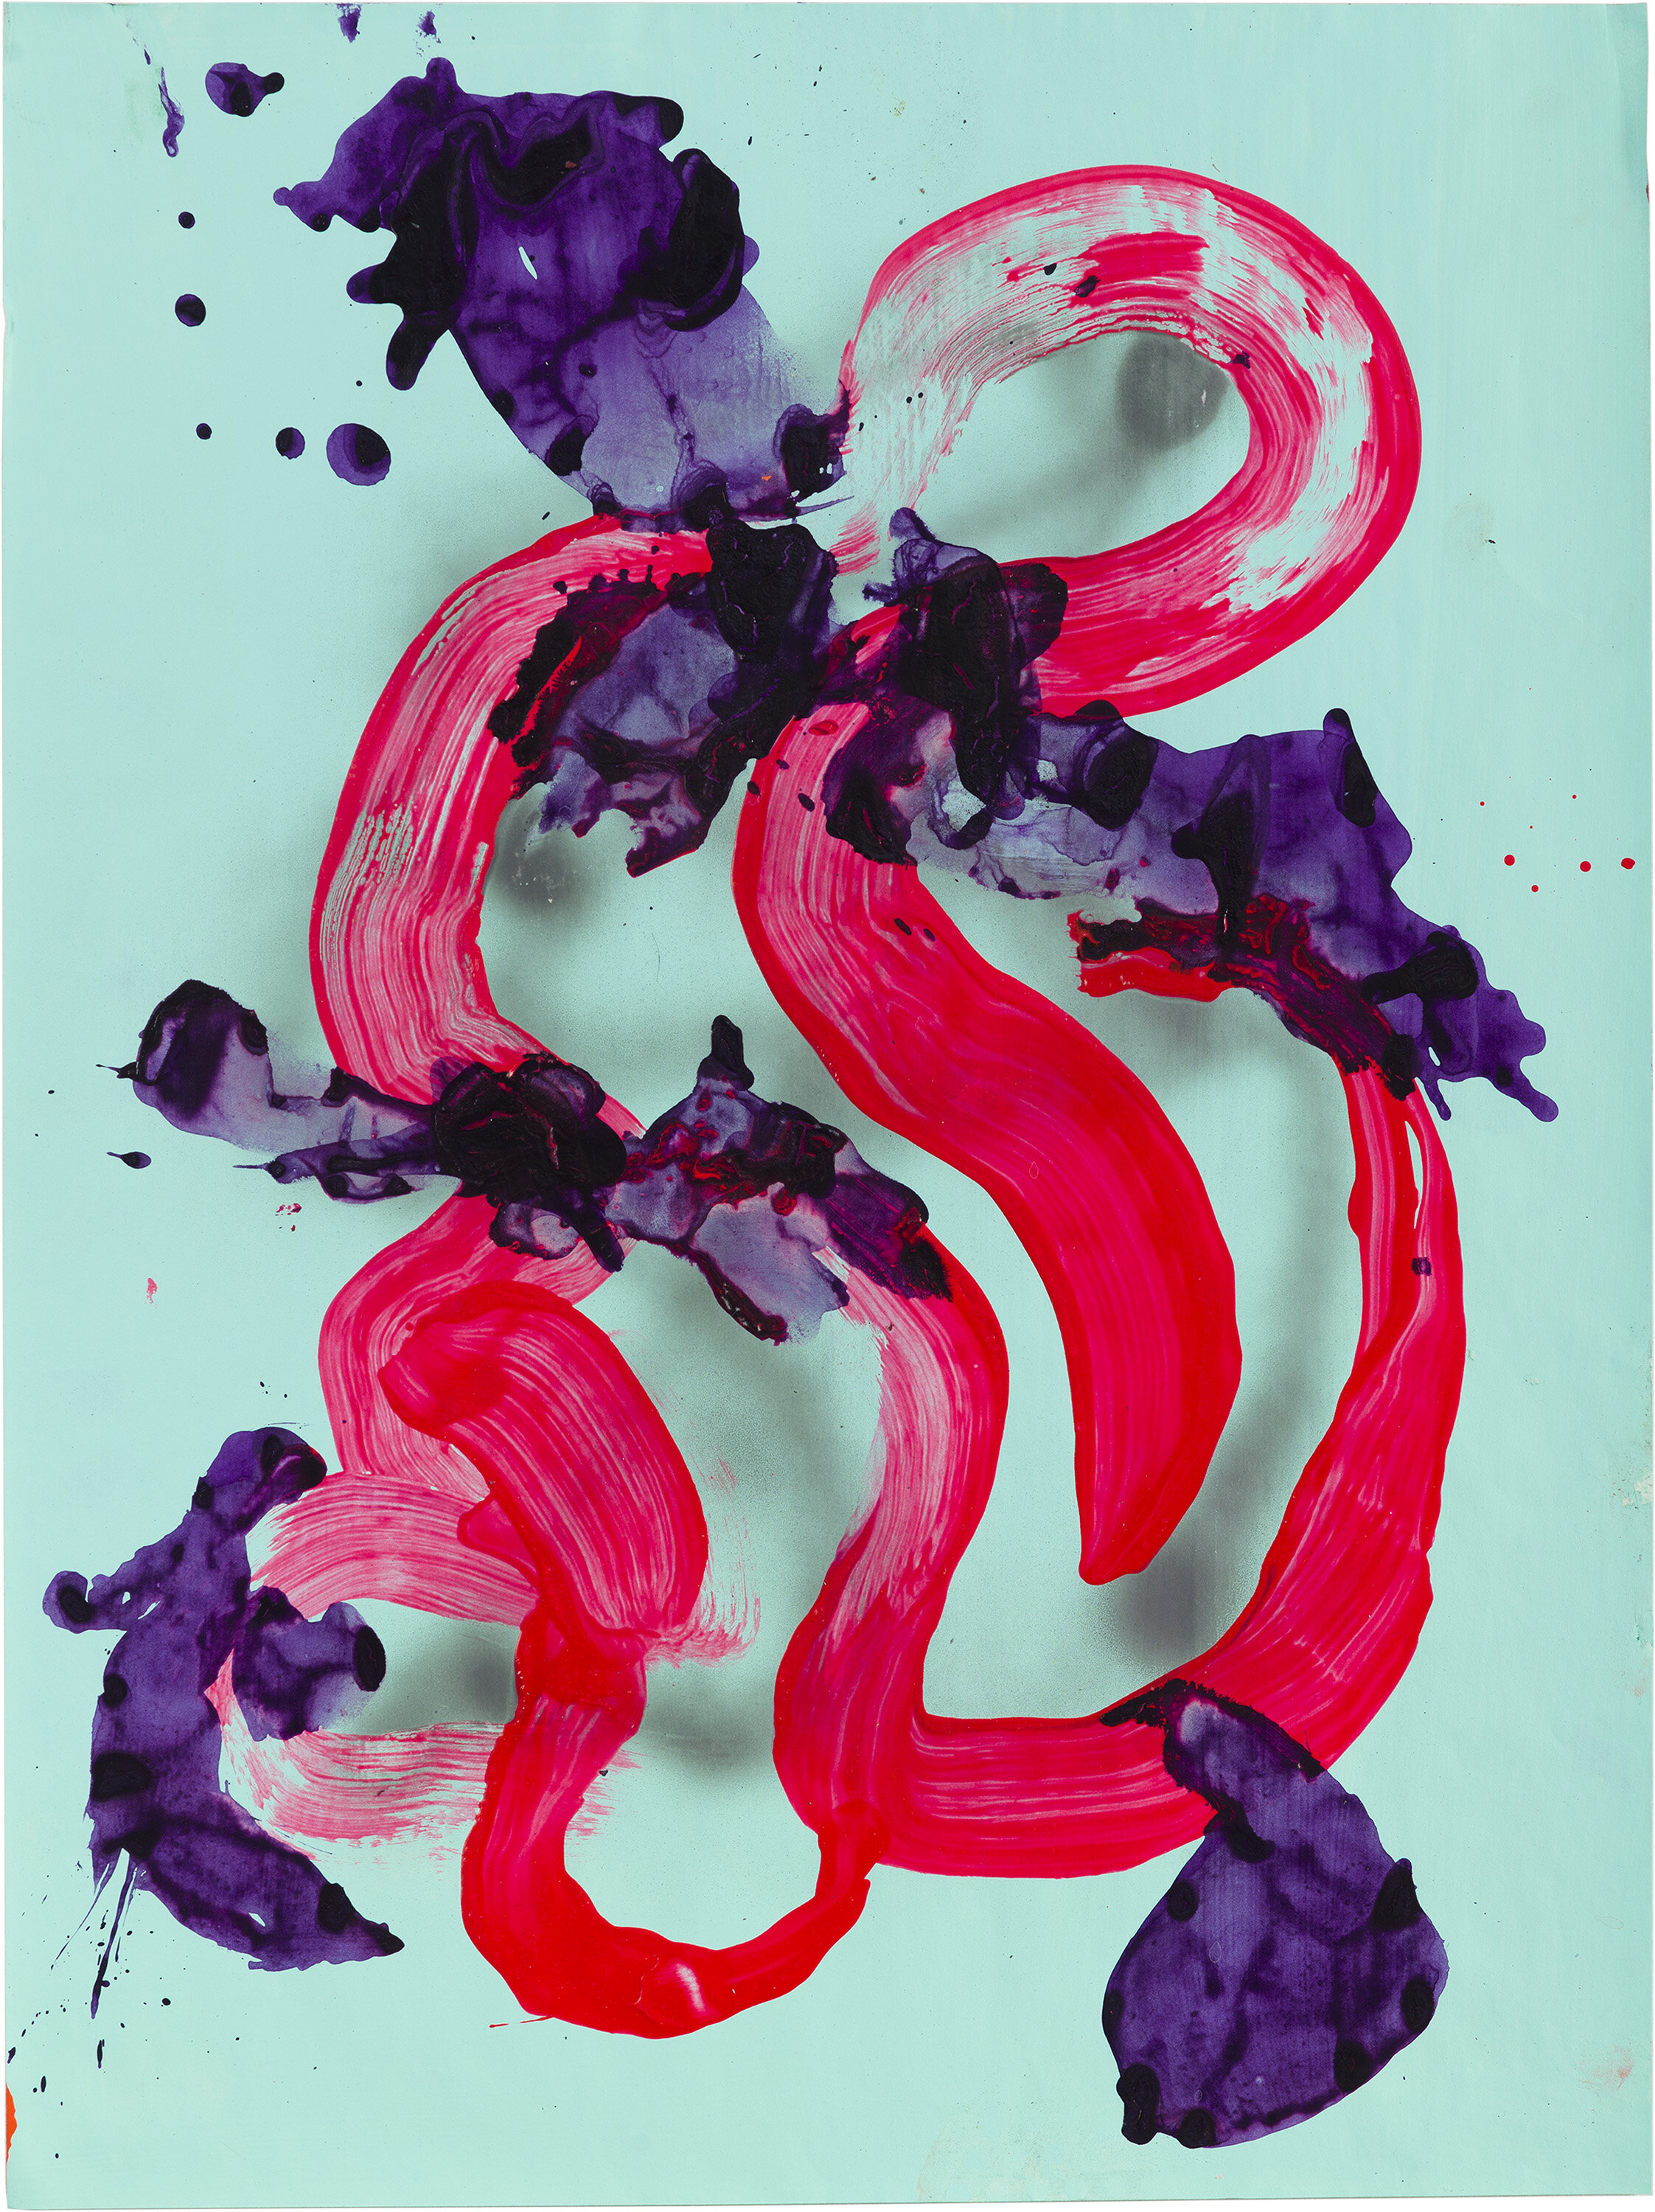  Drew Beattie and Ben Shepard   DBBS-DRW-2015-014   2015  acrylic and spray paint on paper  24 x 18 inches 